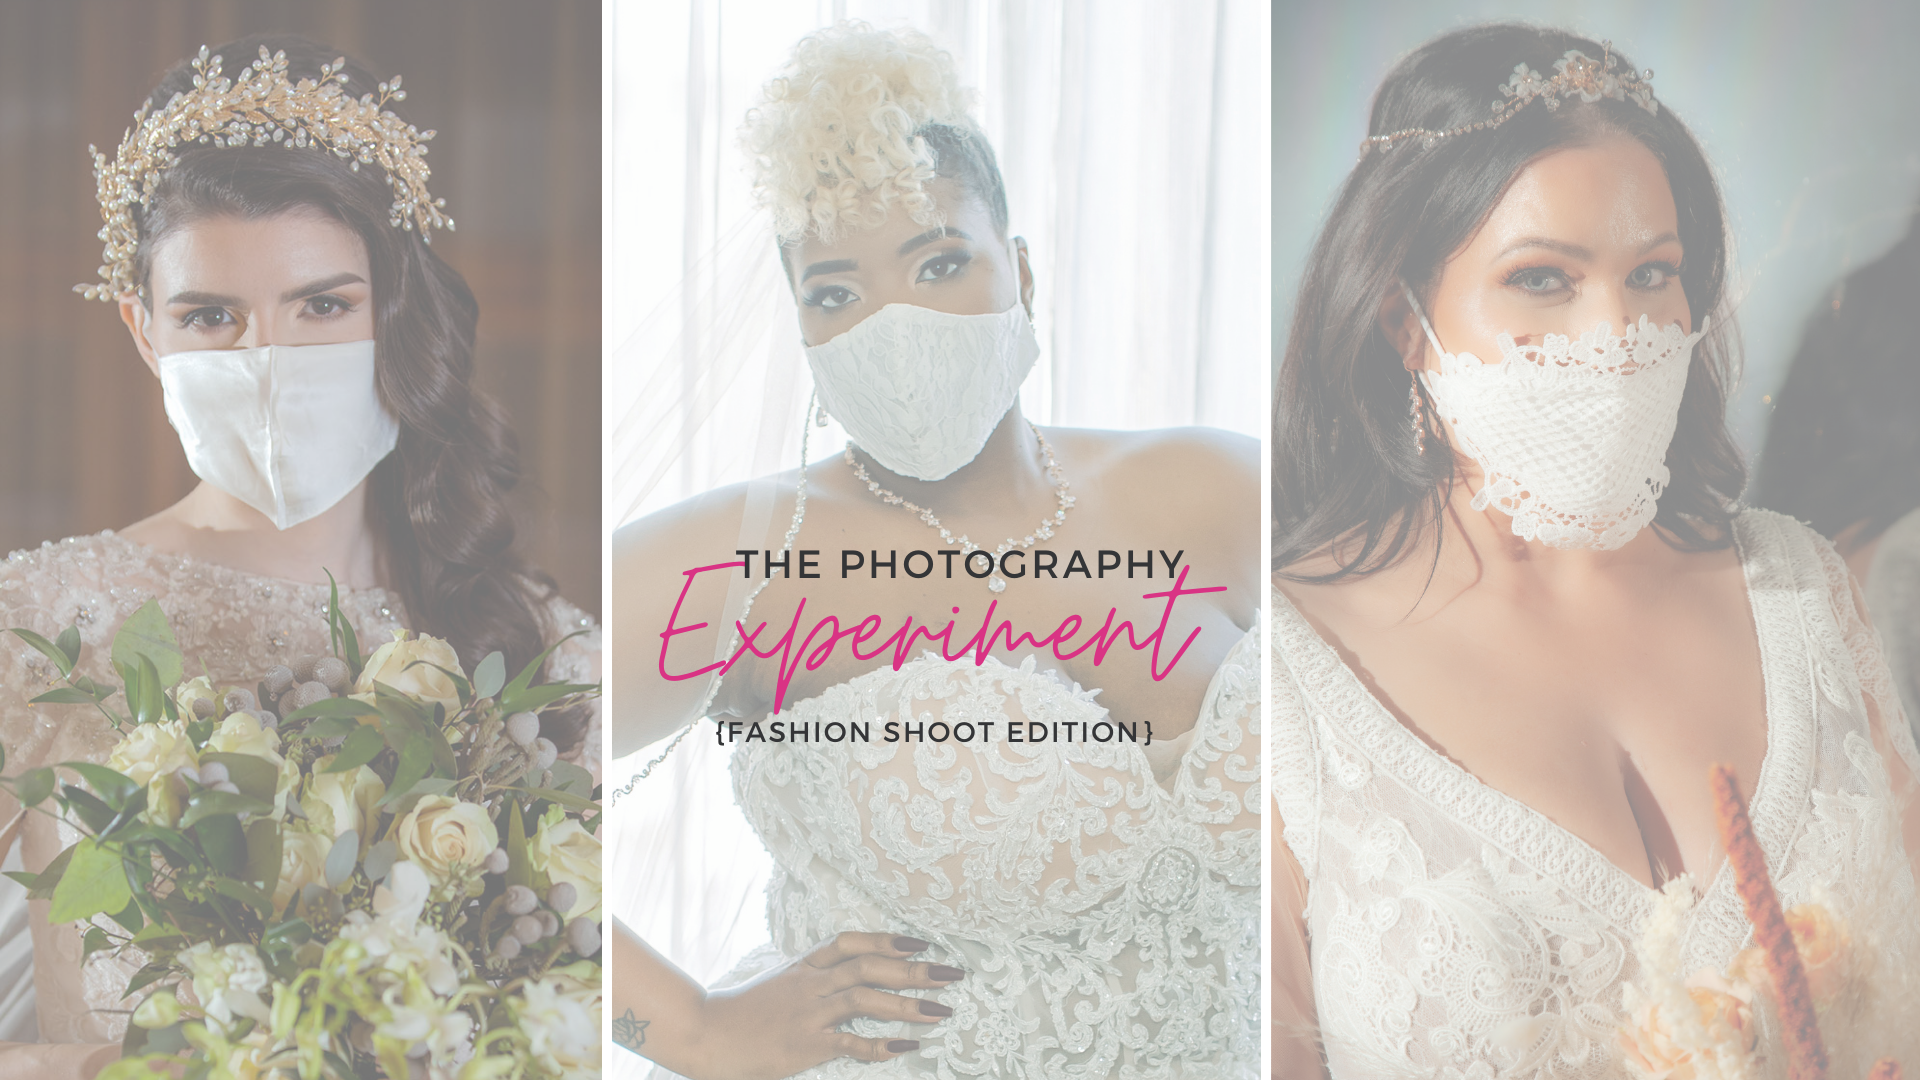 The Photography Experiment Fashion Shoot Edition